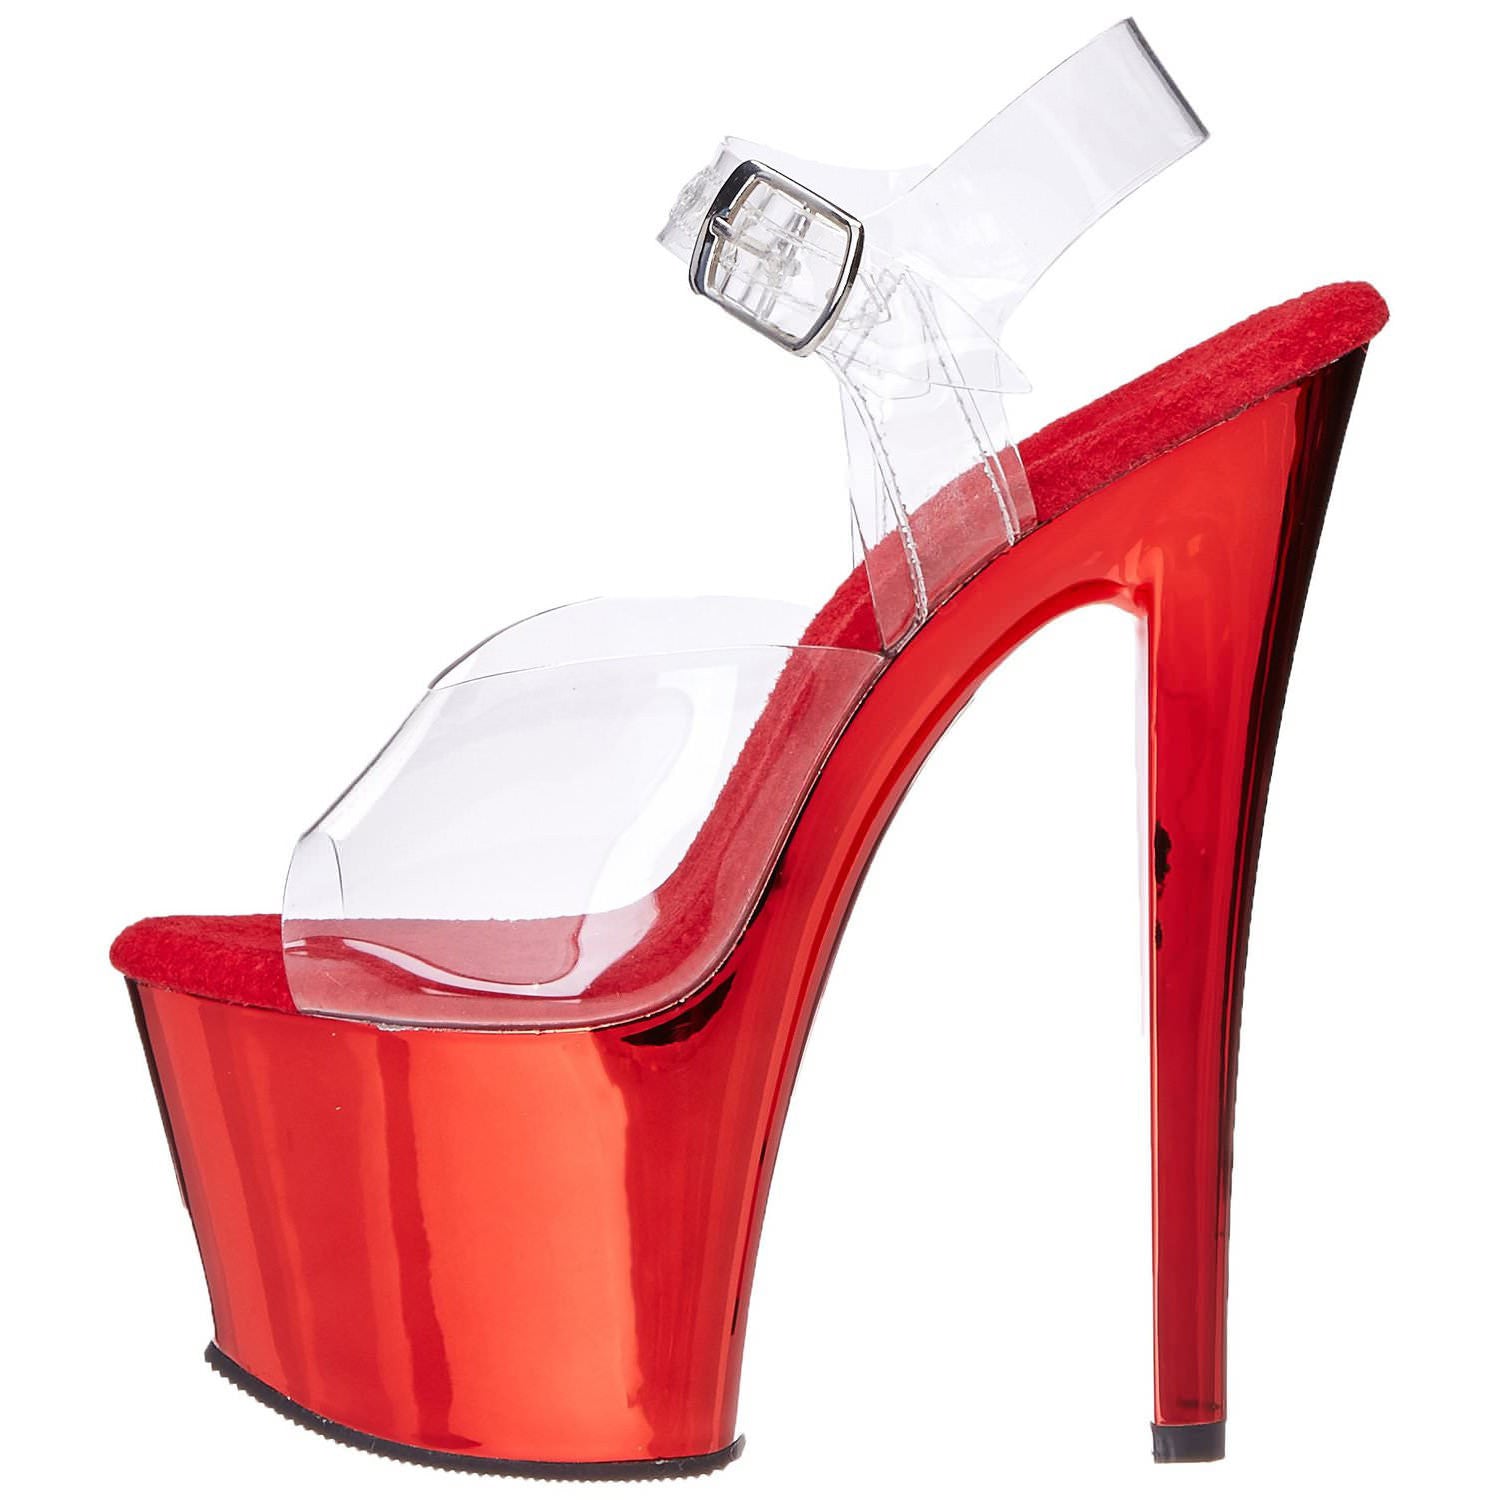 PLEASER SKY-308 Clear-Red Chrome Ankle Strap Sandals - Shoecup.com - 5